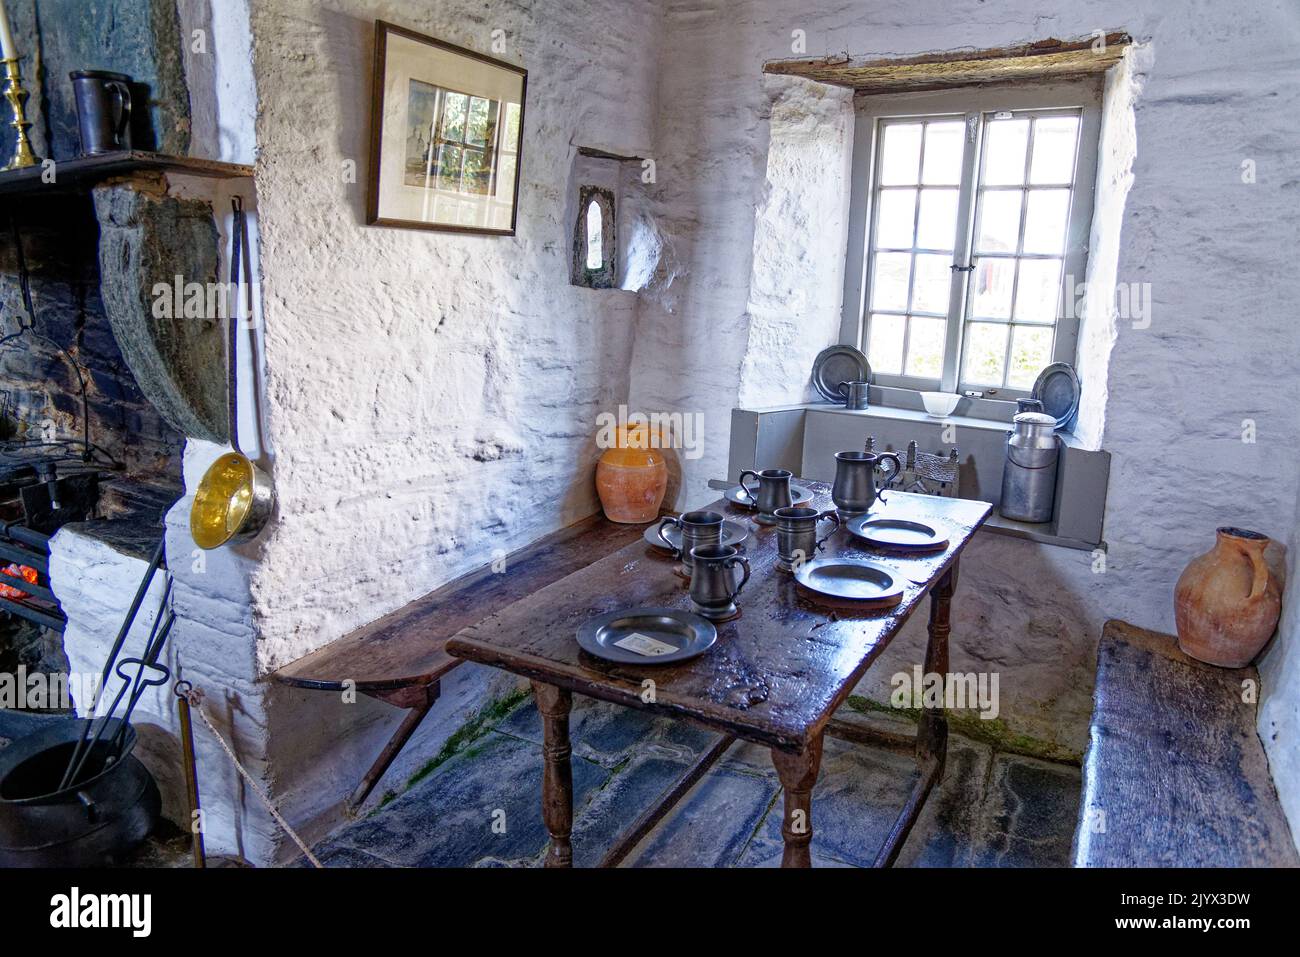 United Kingdom, South West England, Cornwall, Tintagel - Inside The medieval hall-house of 14th century - The Old Post Office. 12th of August, 2022 Stock Photo